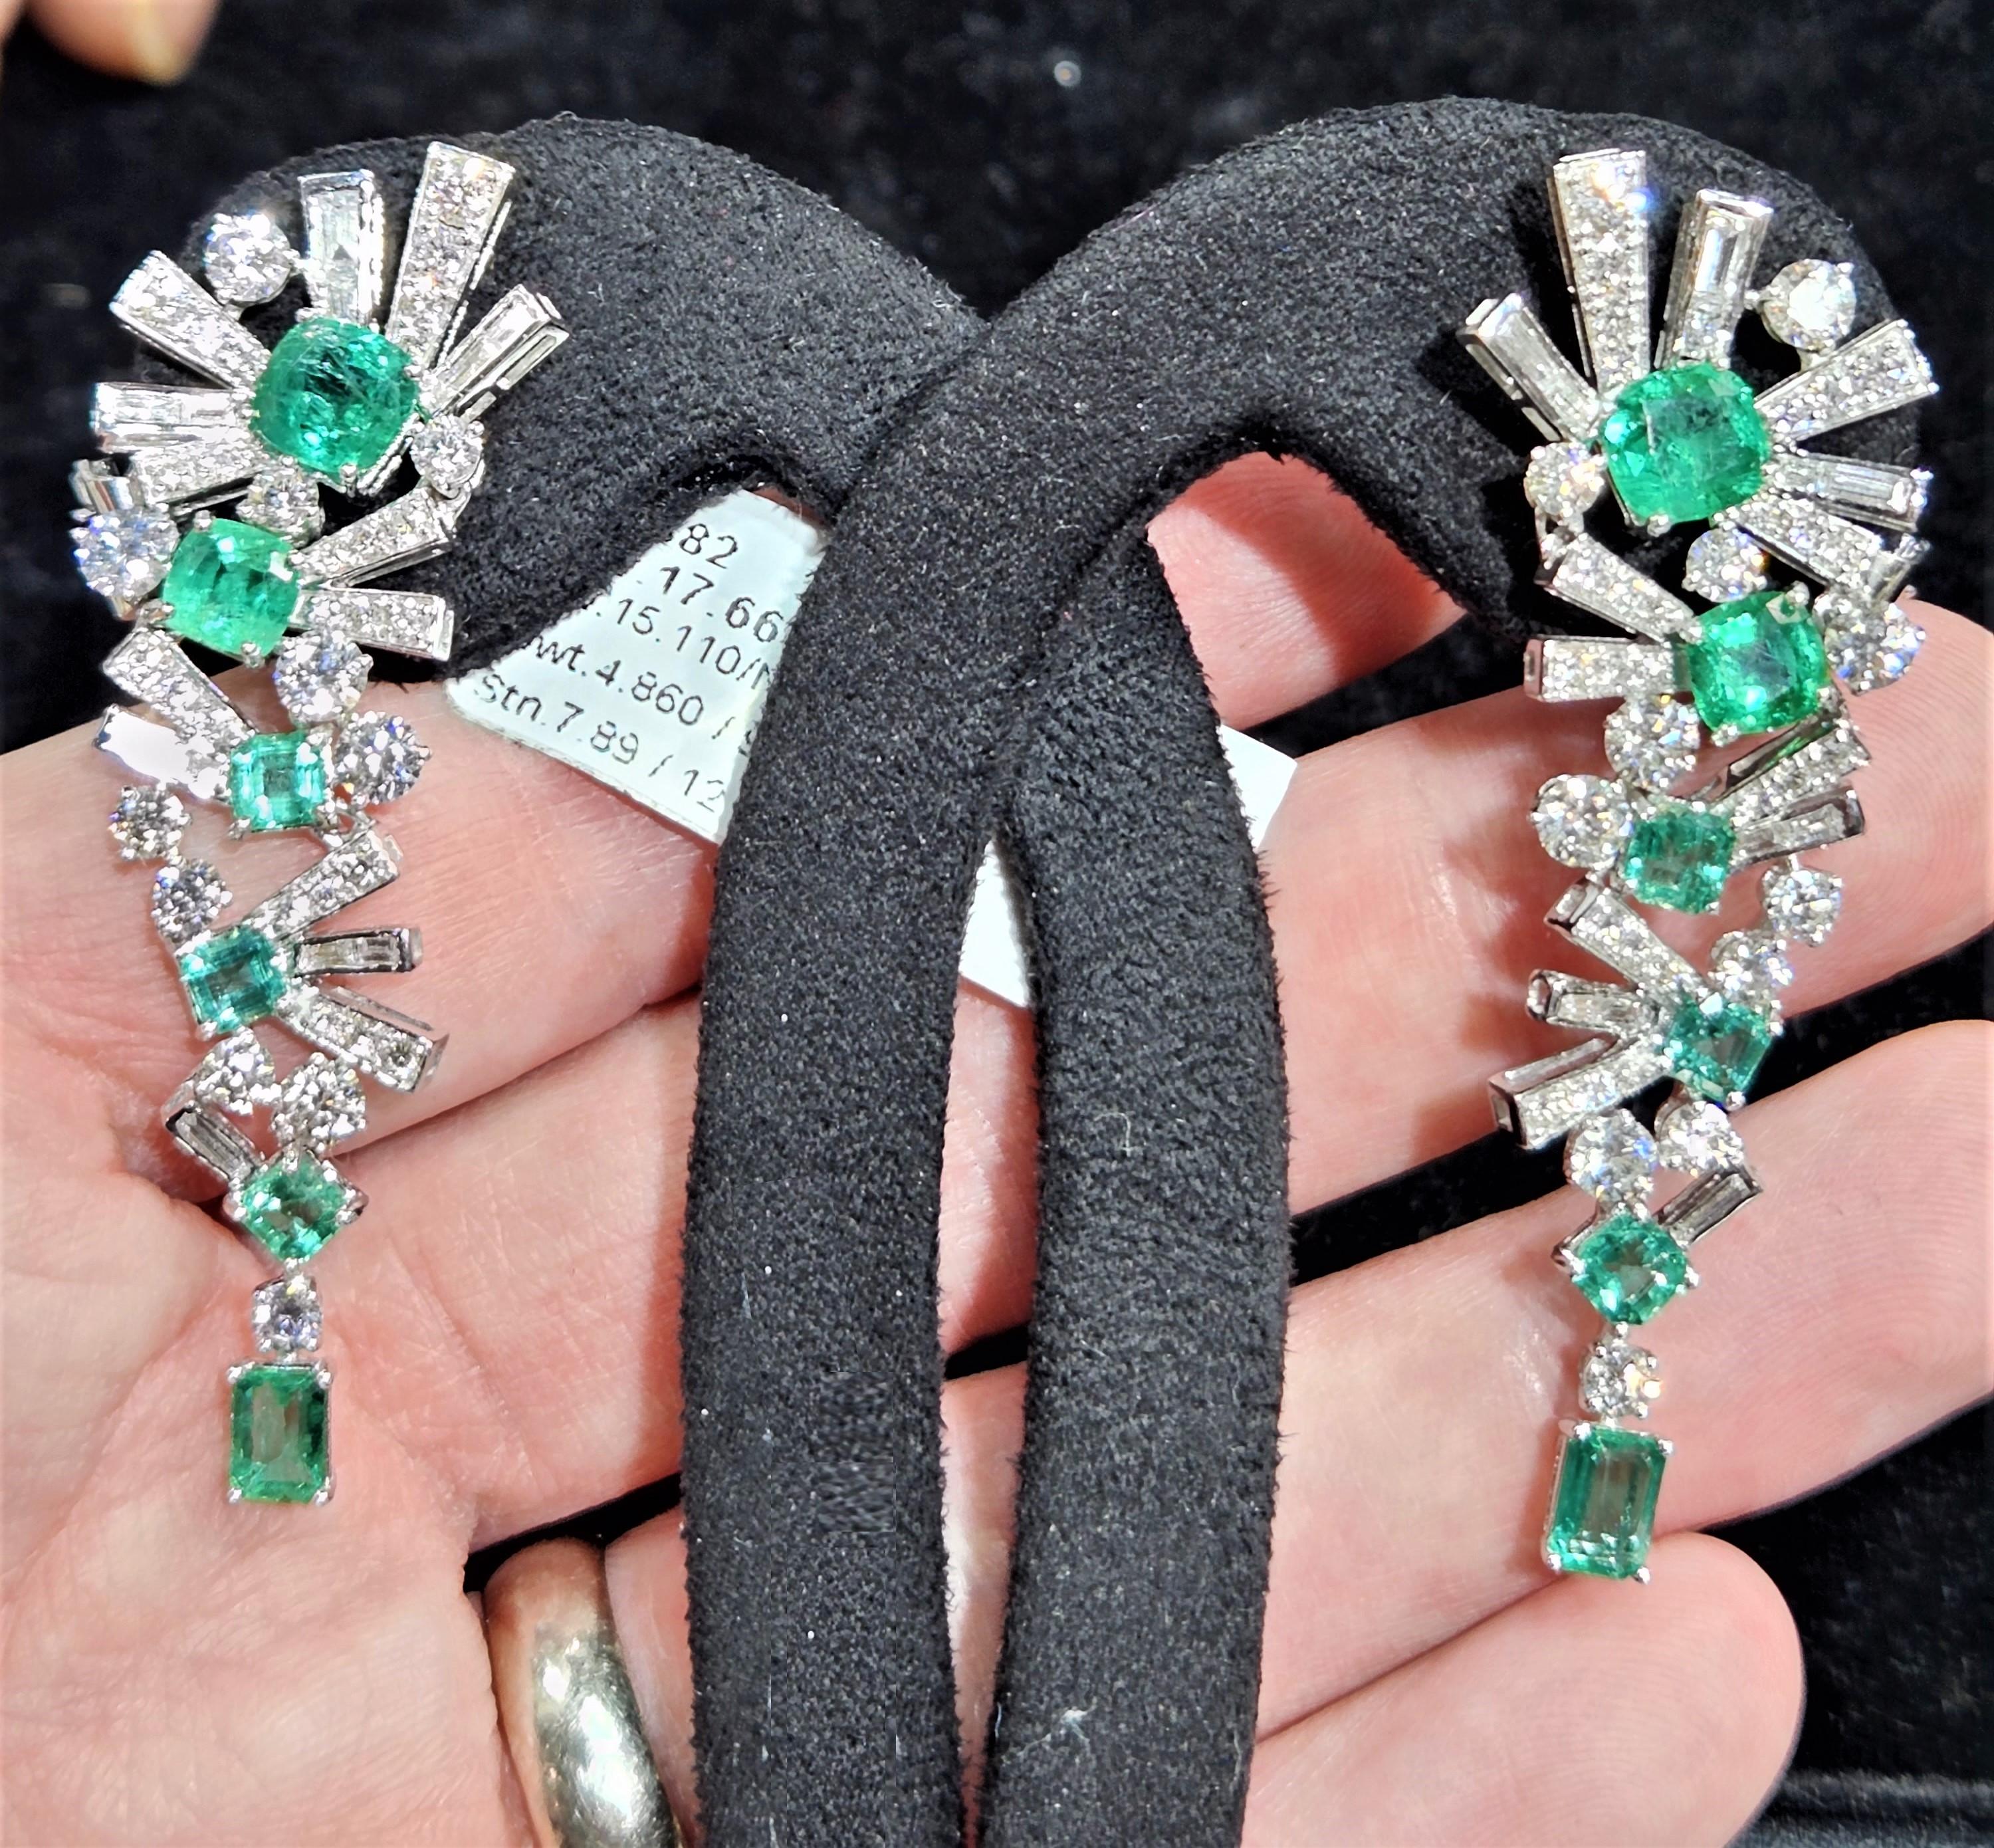 The Following Item we are offering is this Rare Important Radiant 14KT Gold Gorgeous Glittering and Sparkling Magnificent Fancy Emerald and Baguette Diamond Dangle Earrings. Earrings contain approx 12.50CTS of Beautiful Rare Fancy Emeralds and